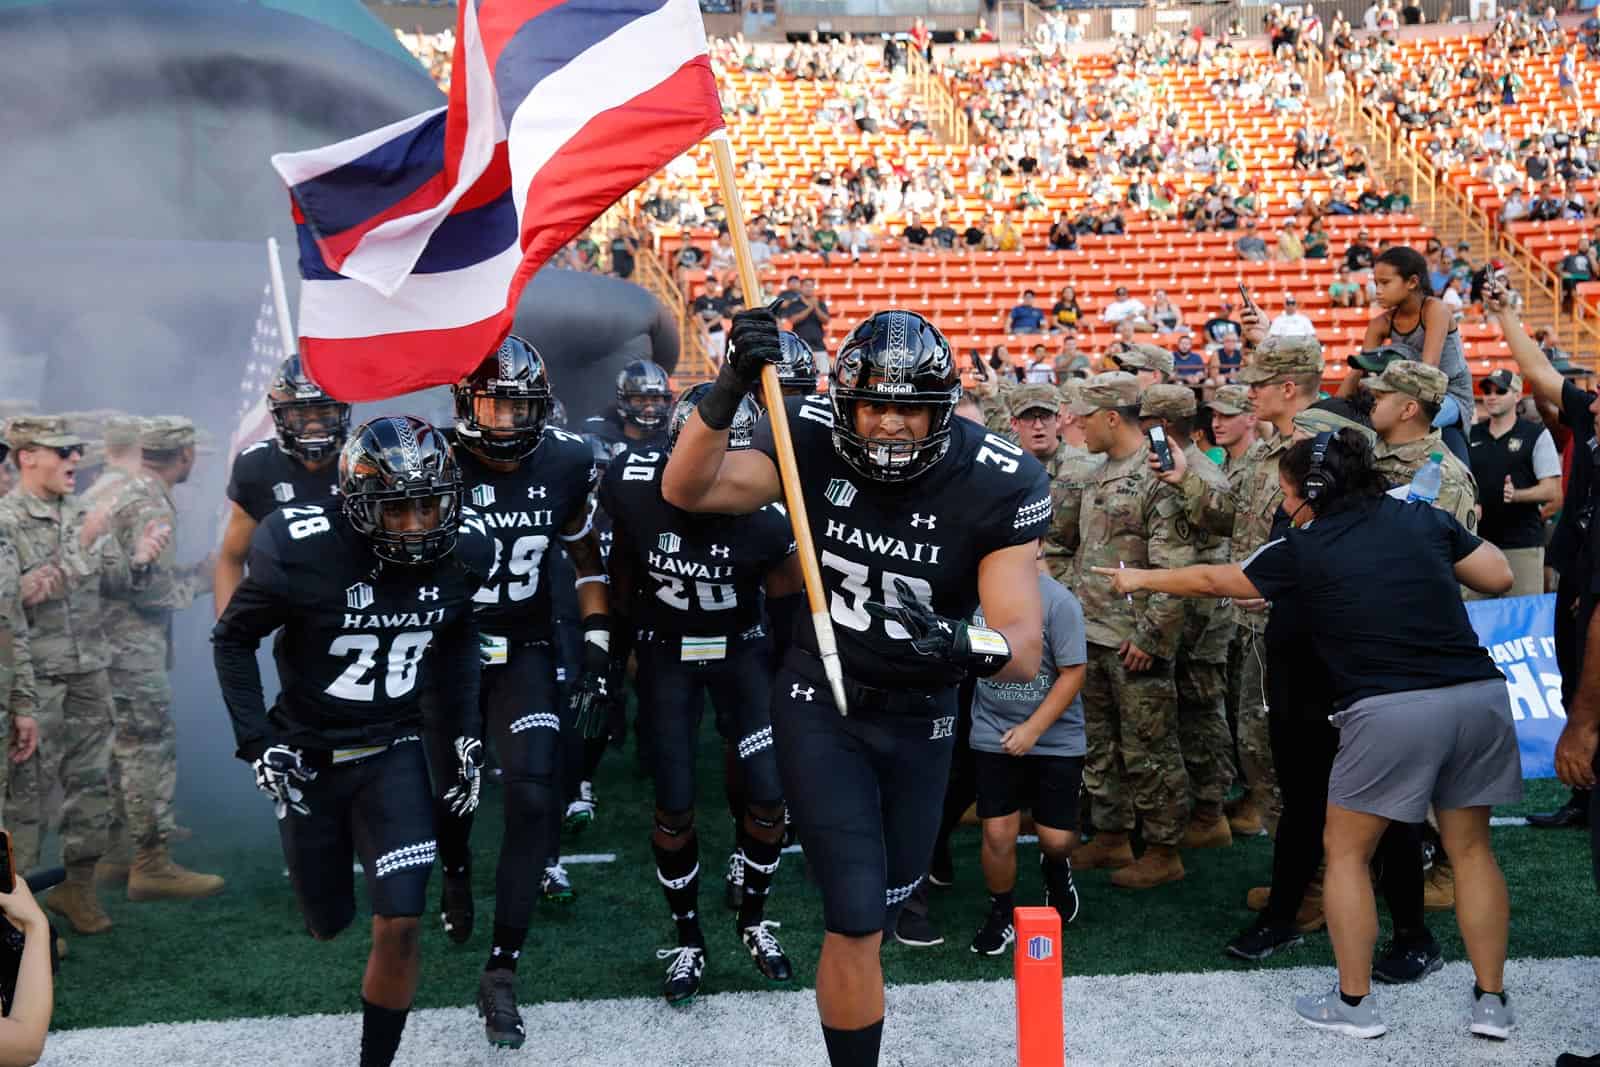 The Hawaii Exemption, Week Zero, and the 2019 college football schedule